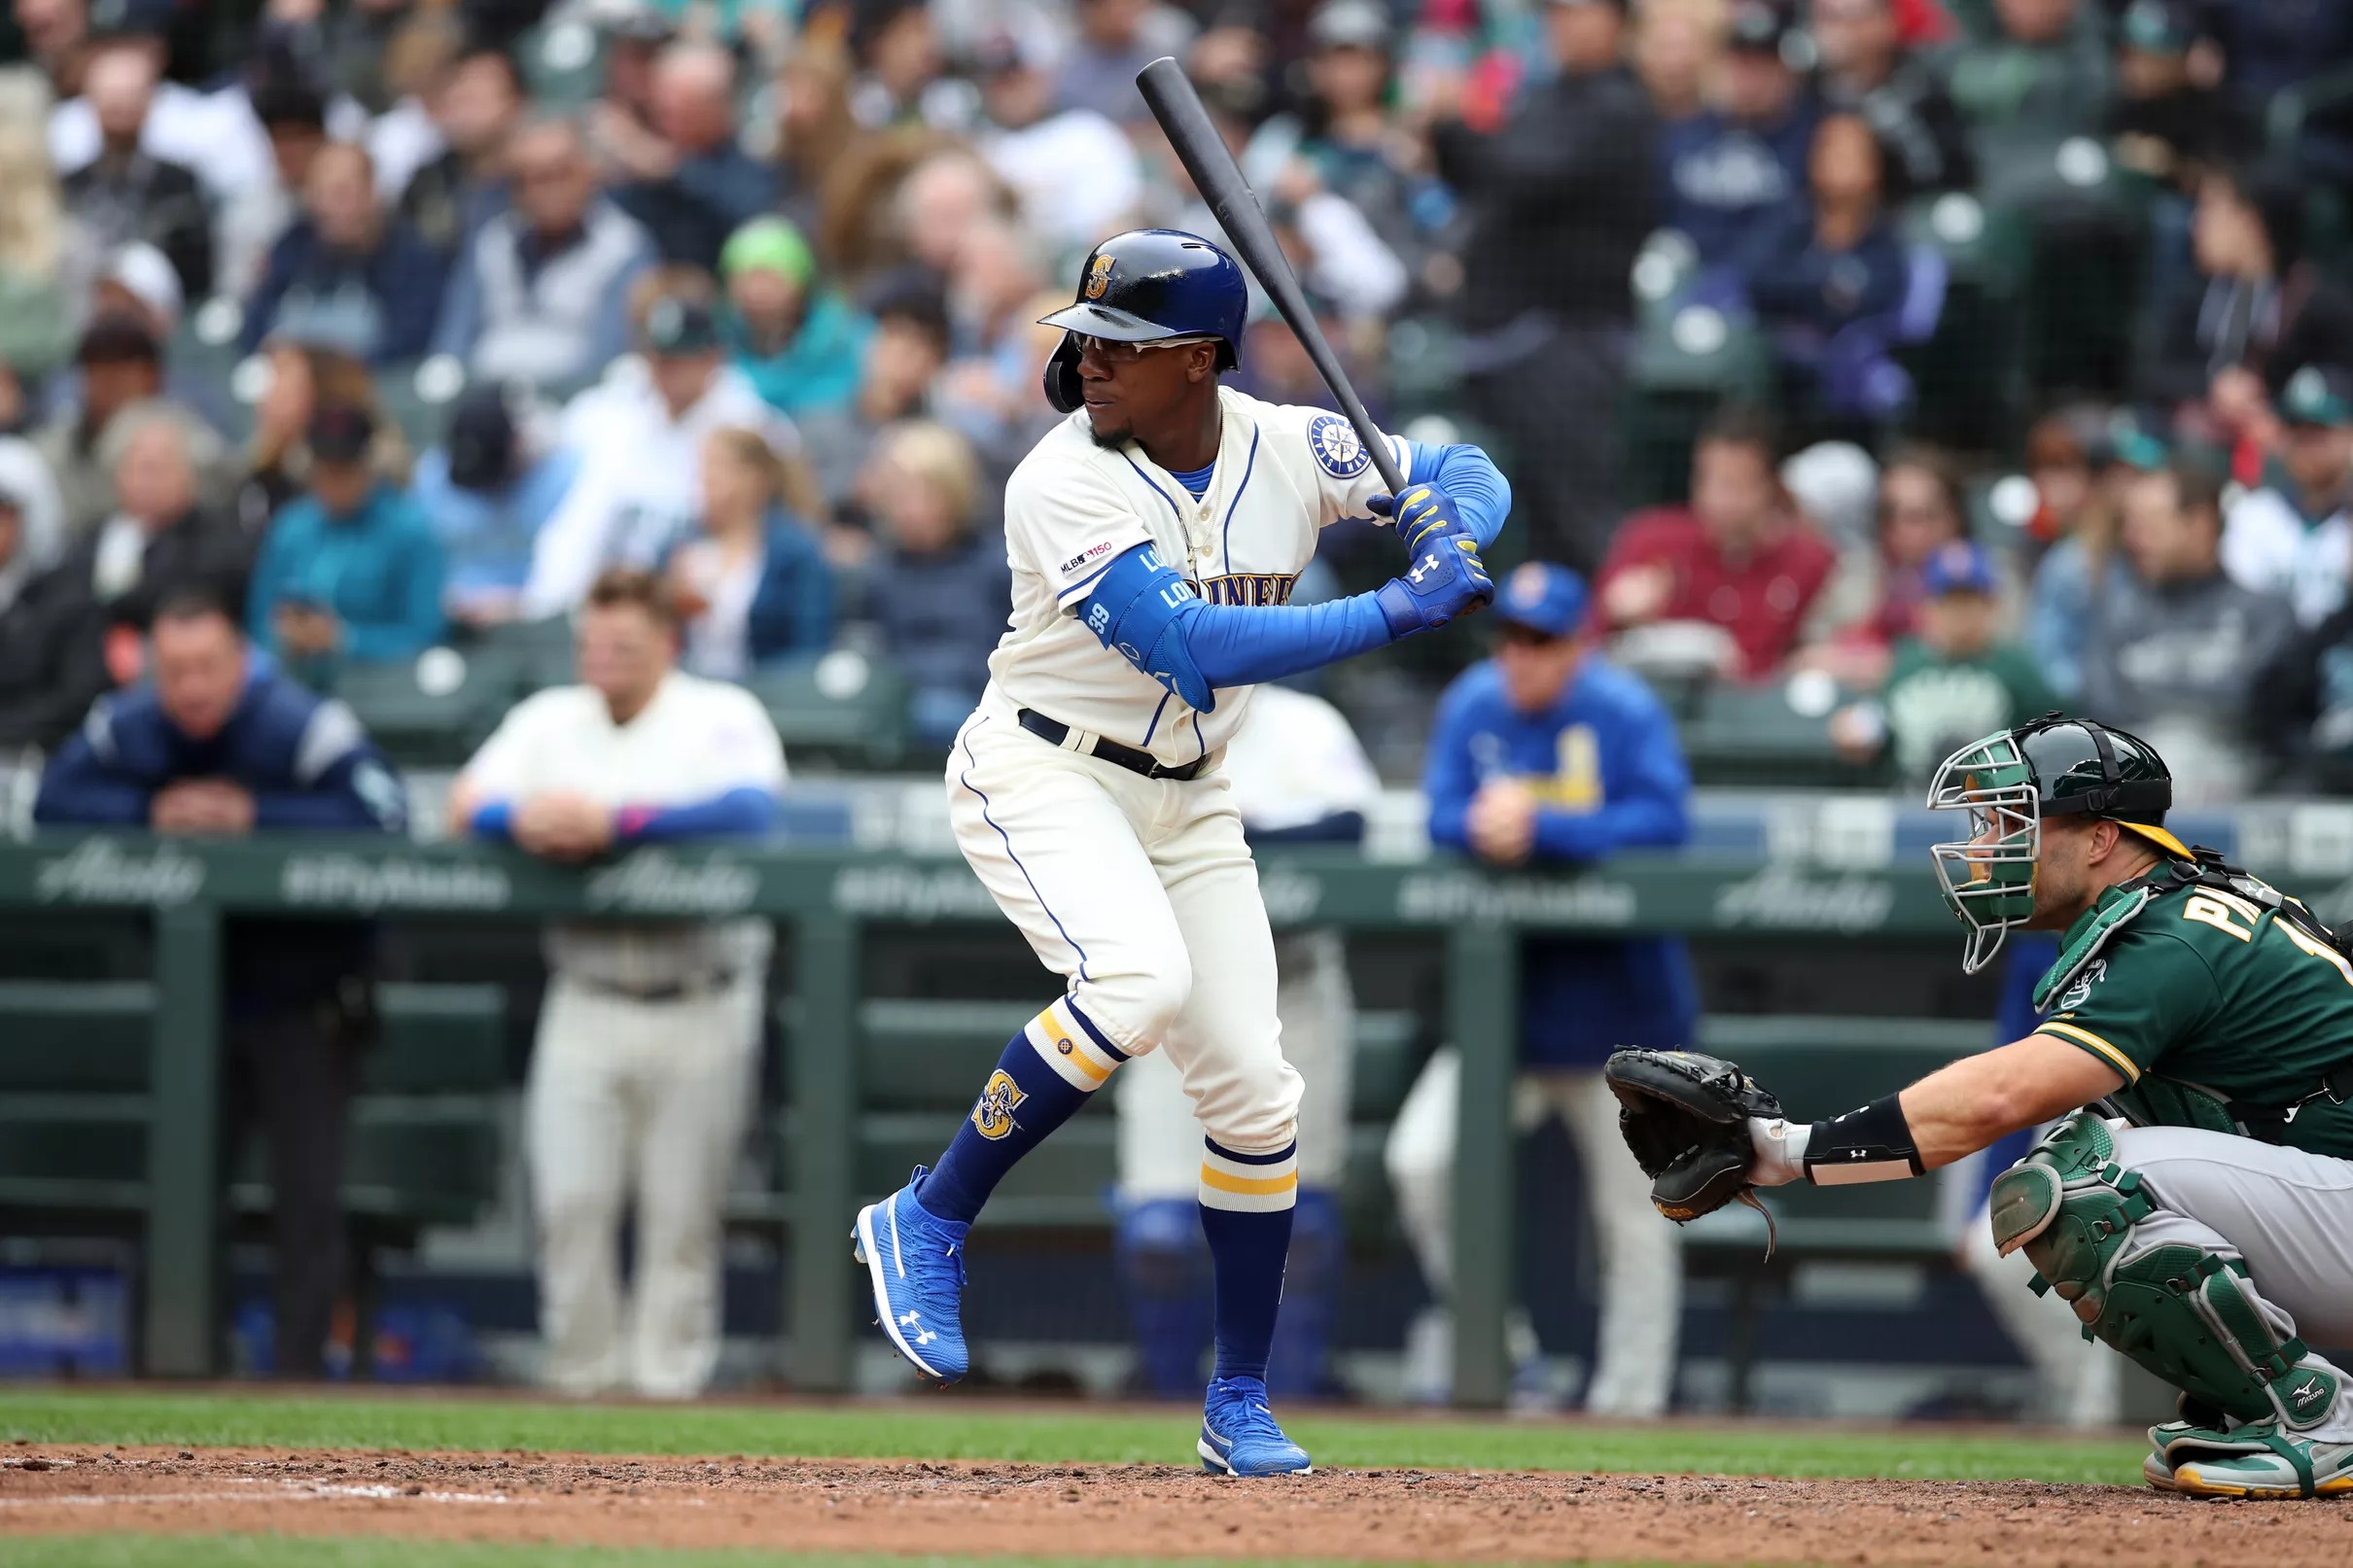 FanGraphs releases 2020 ZiPS projections for the Mariners